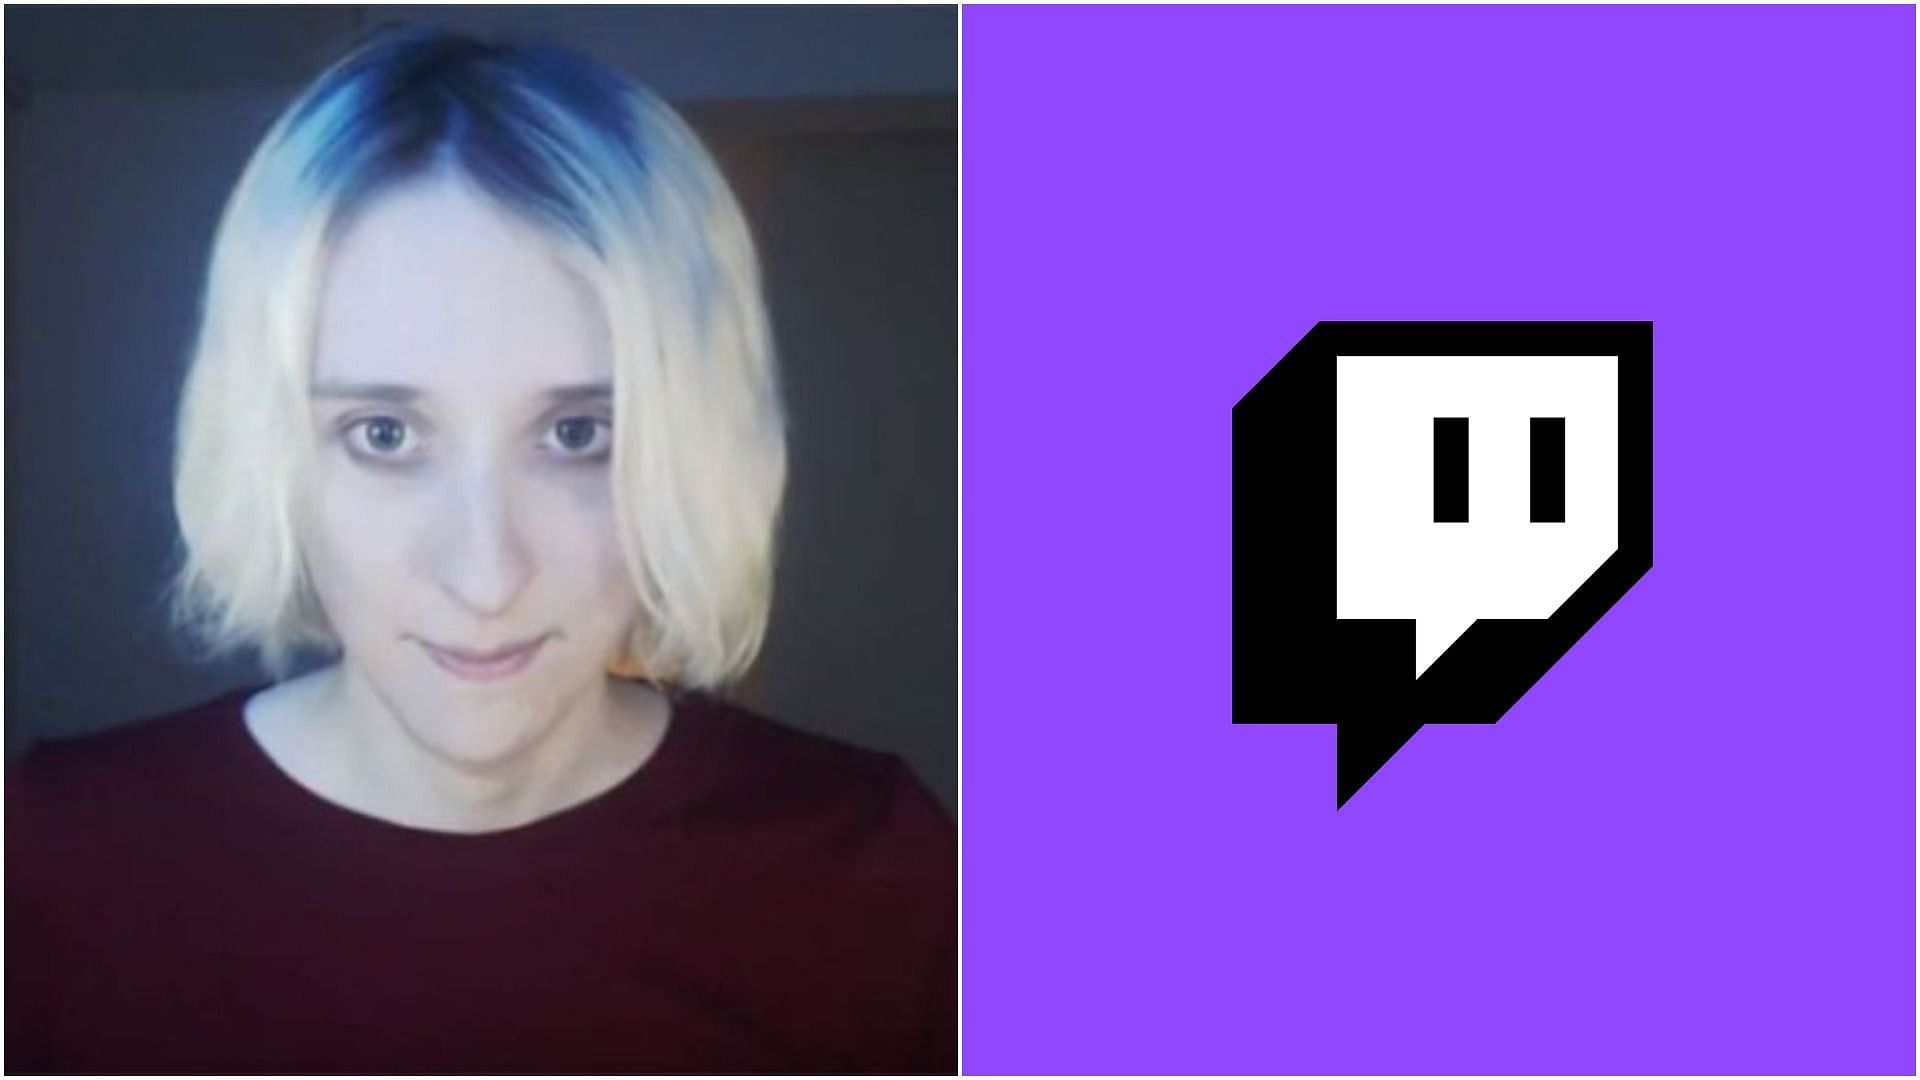 Streamer narcissa wright receives reduced ban after apologizing for death threats directed at Twitch staff (Image via Sportskeeda)